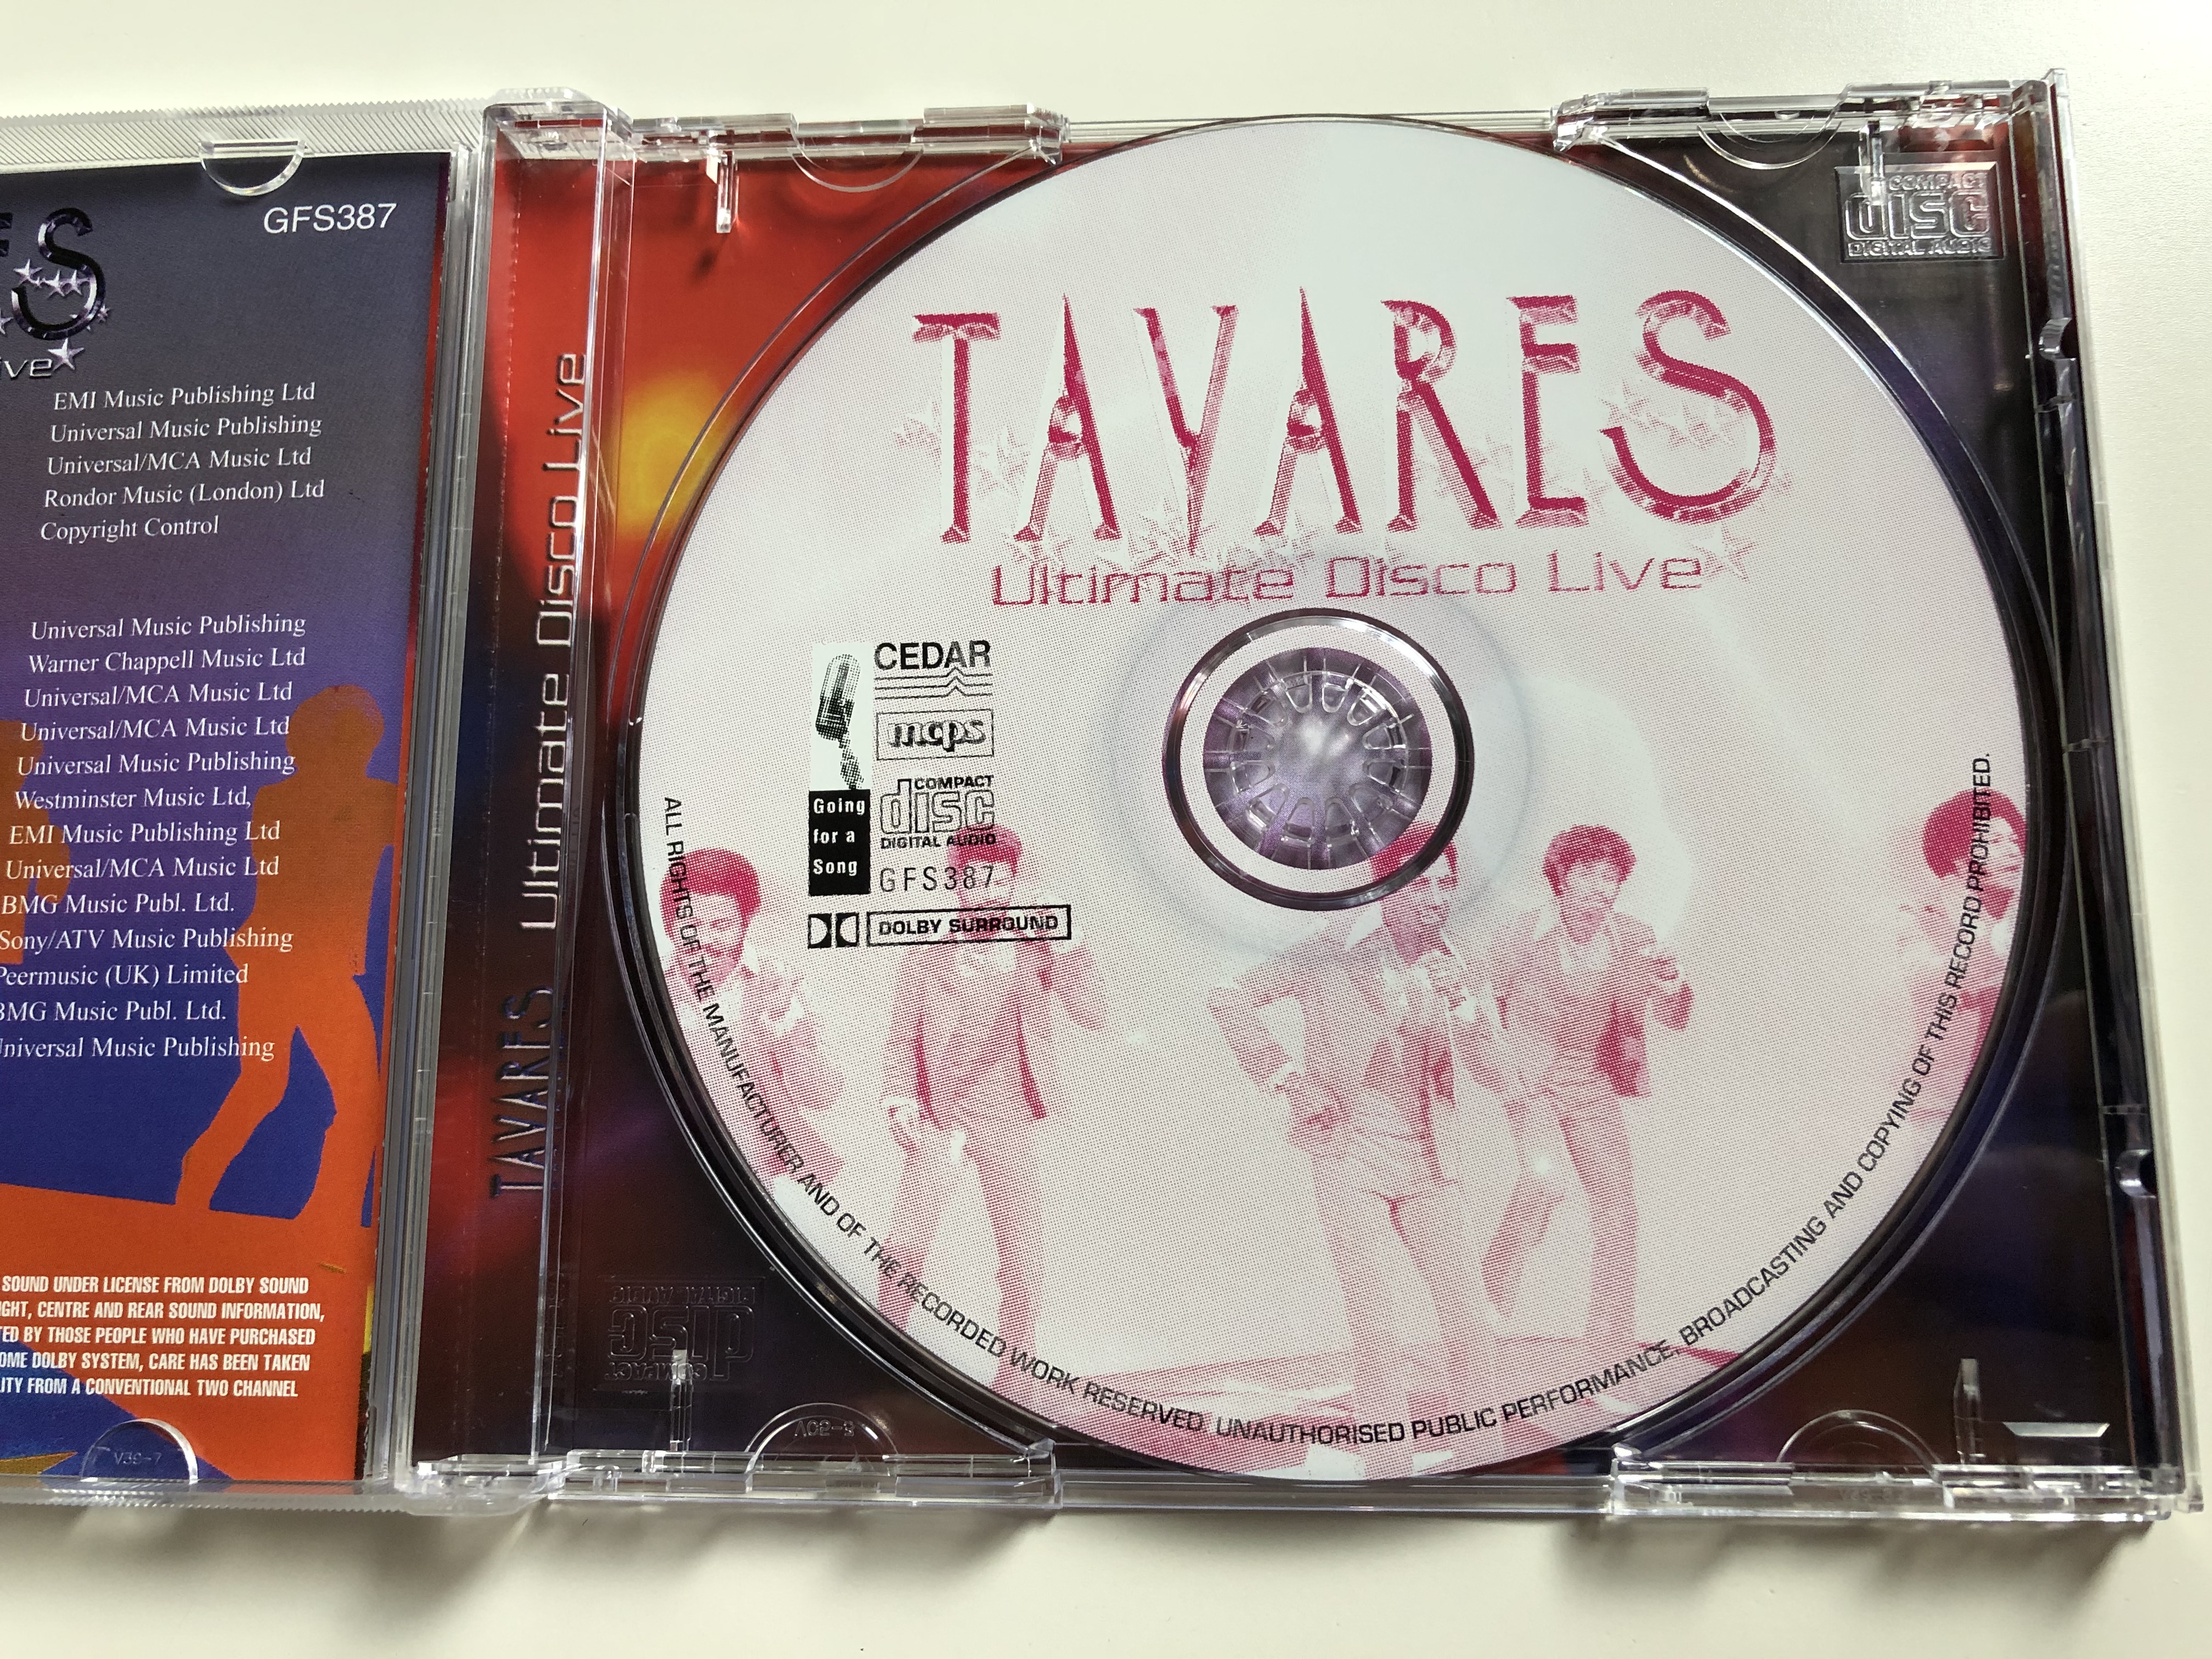 tavares-ultimate-disco-live-never-had-a-love-like-this-before-don-t-take-away-the-music-it-only-takes-a-minute-more-than-a-woman-and-many-more-going-for-a-song-audio-cd-gfs387-4-.jpg